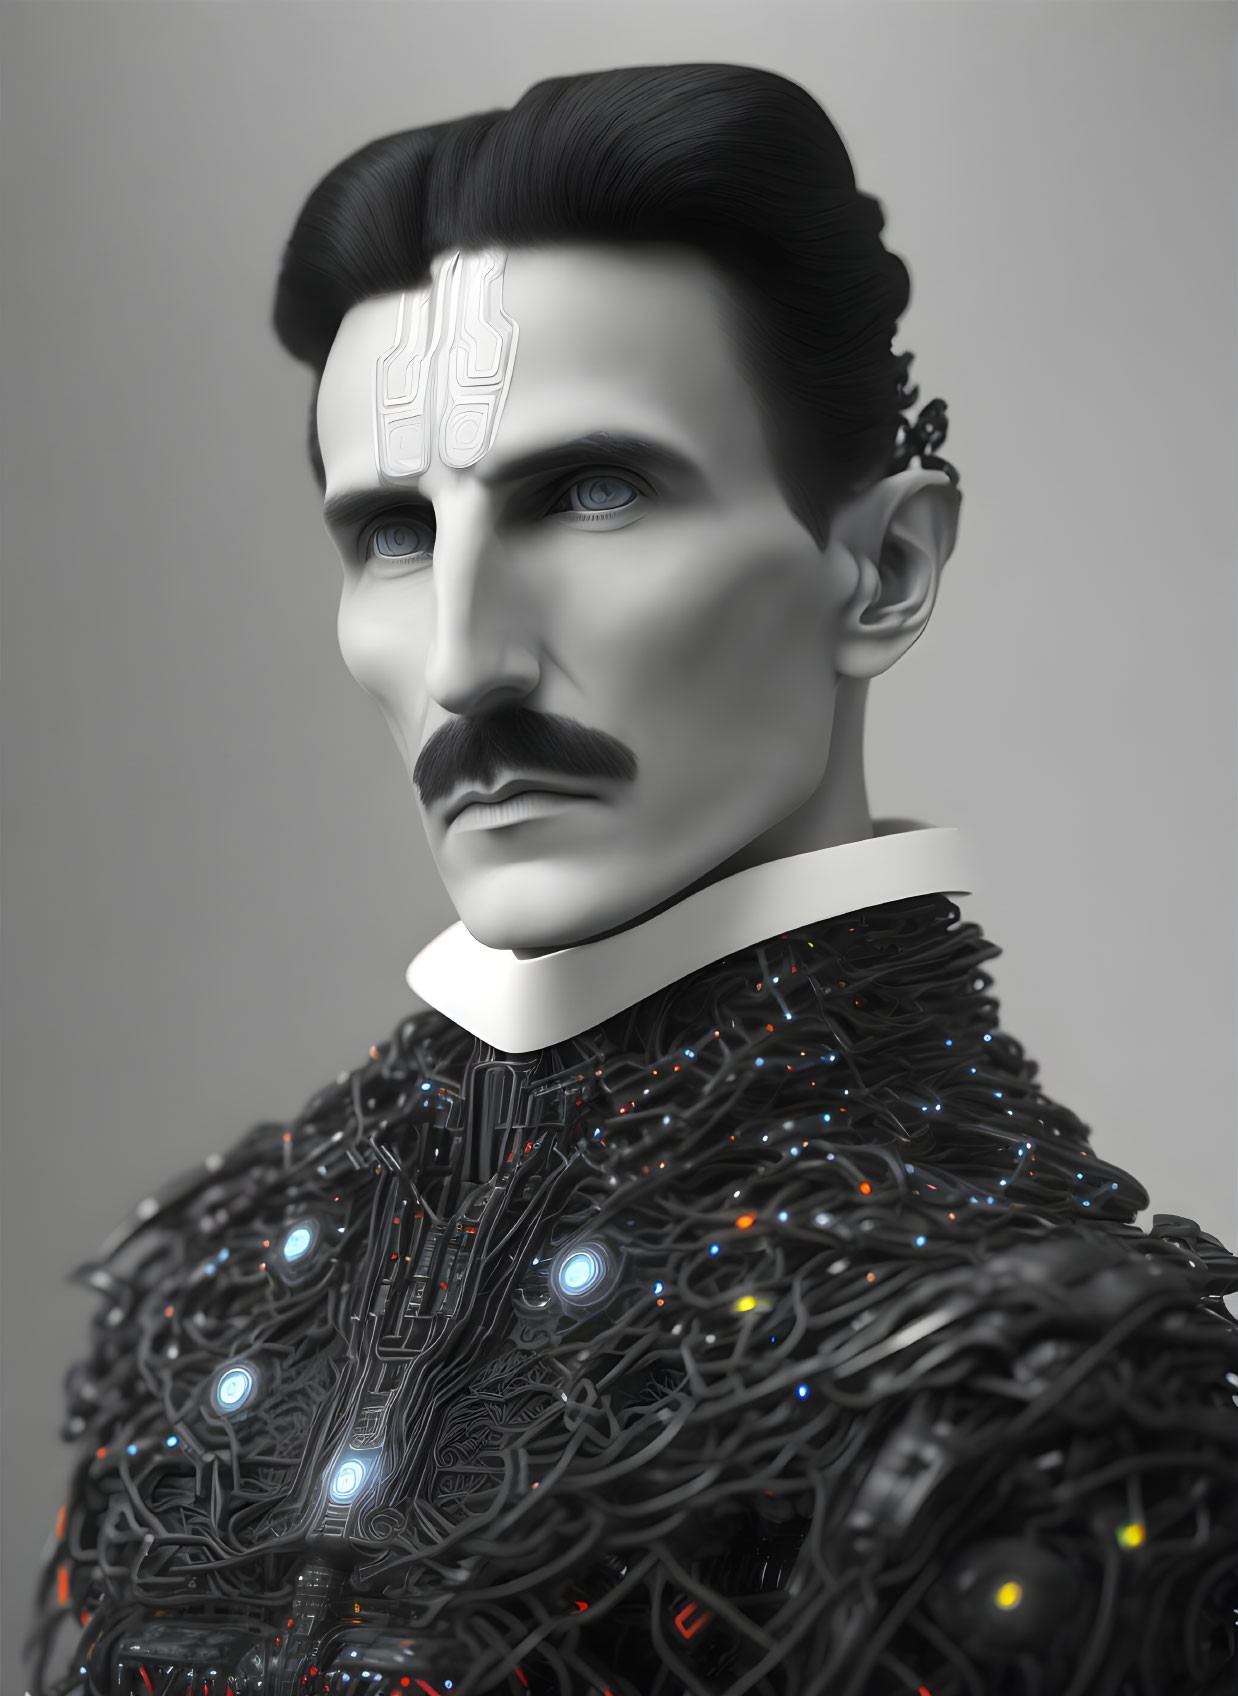 Monochromatic portrait of a man with stylized facial hair and illuminated circuitry, emitting a futuristic